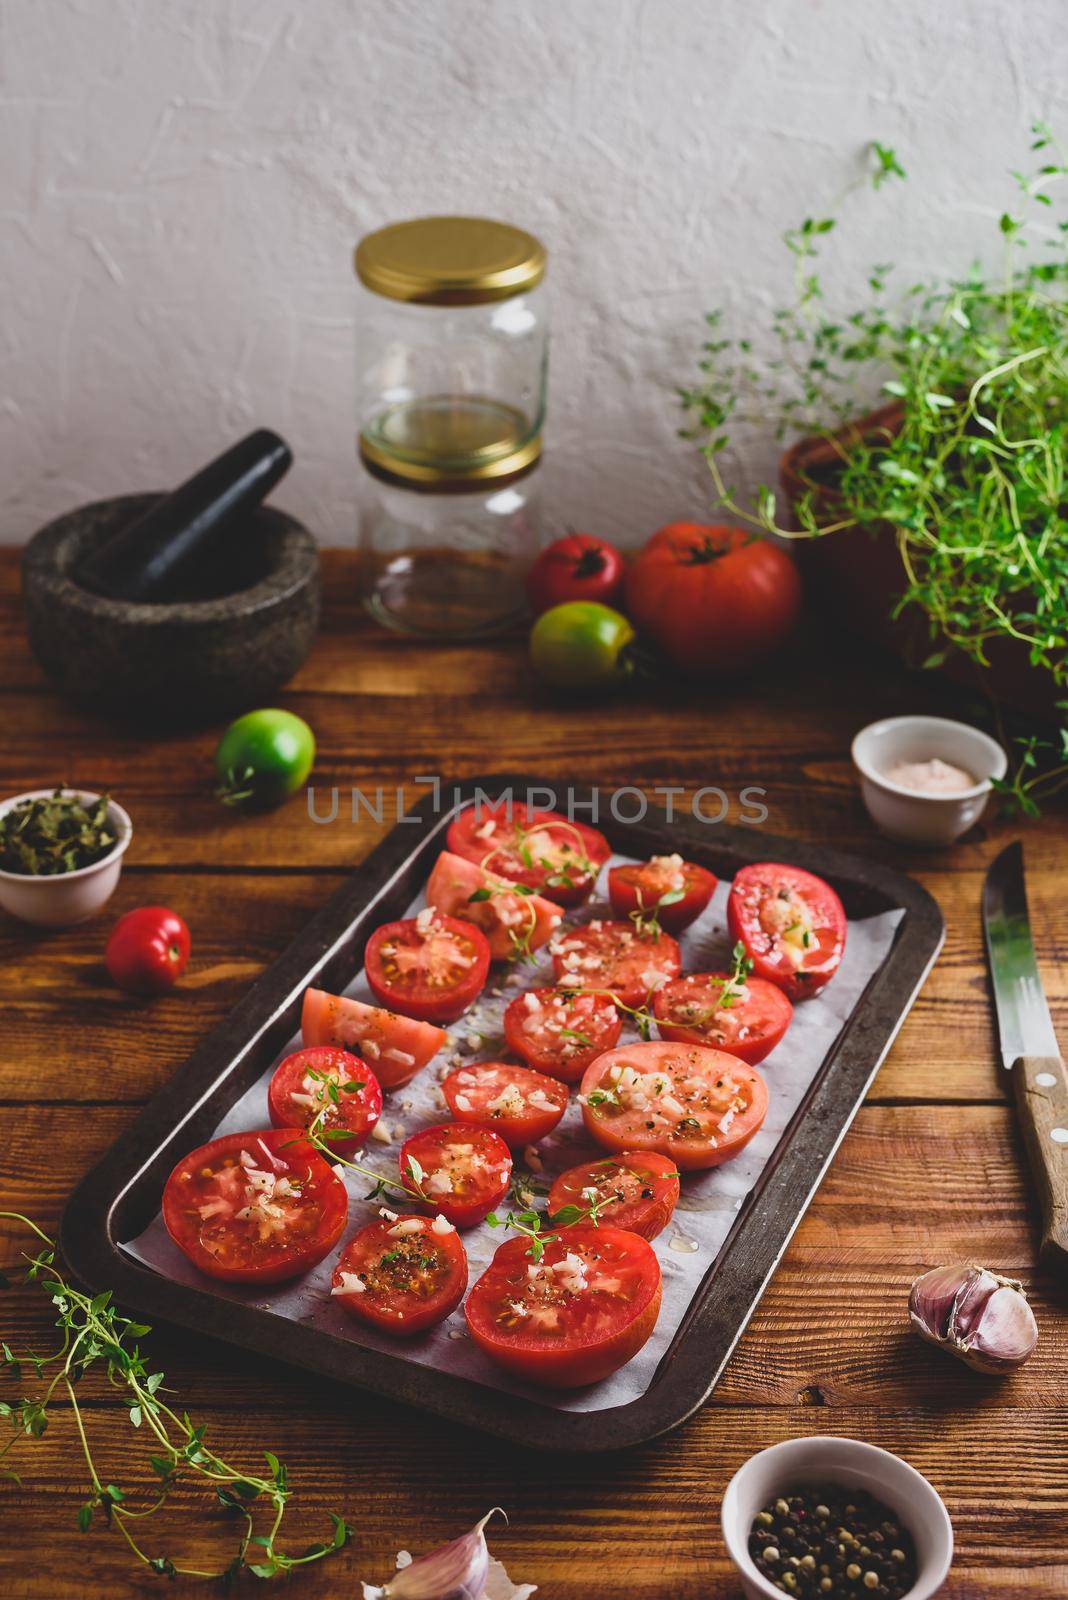 Sliced Tomatoes with Thyme and Garlic on Baking Dish by Seva_blsv